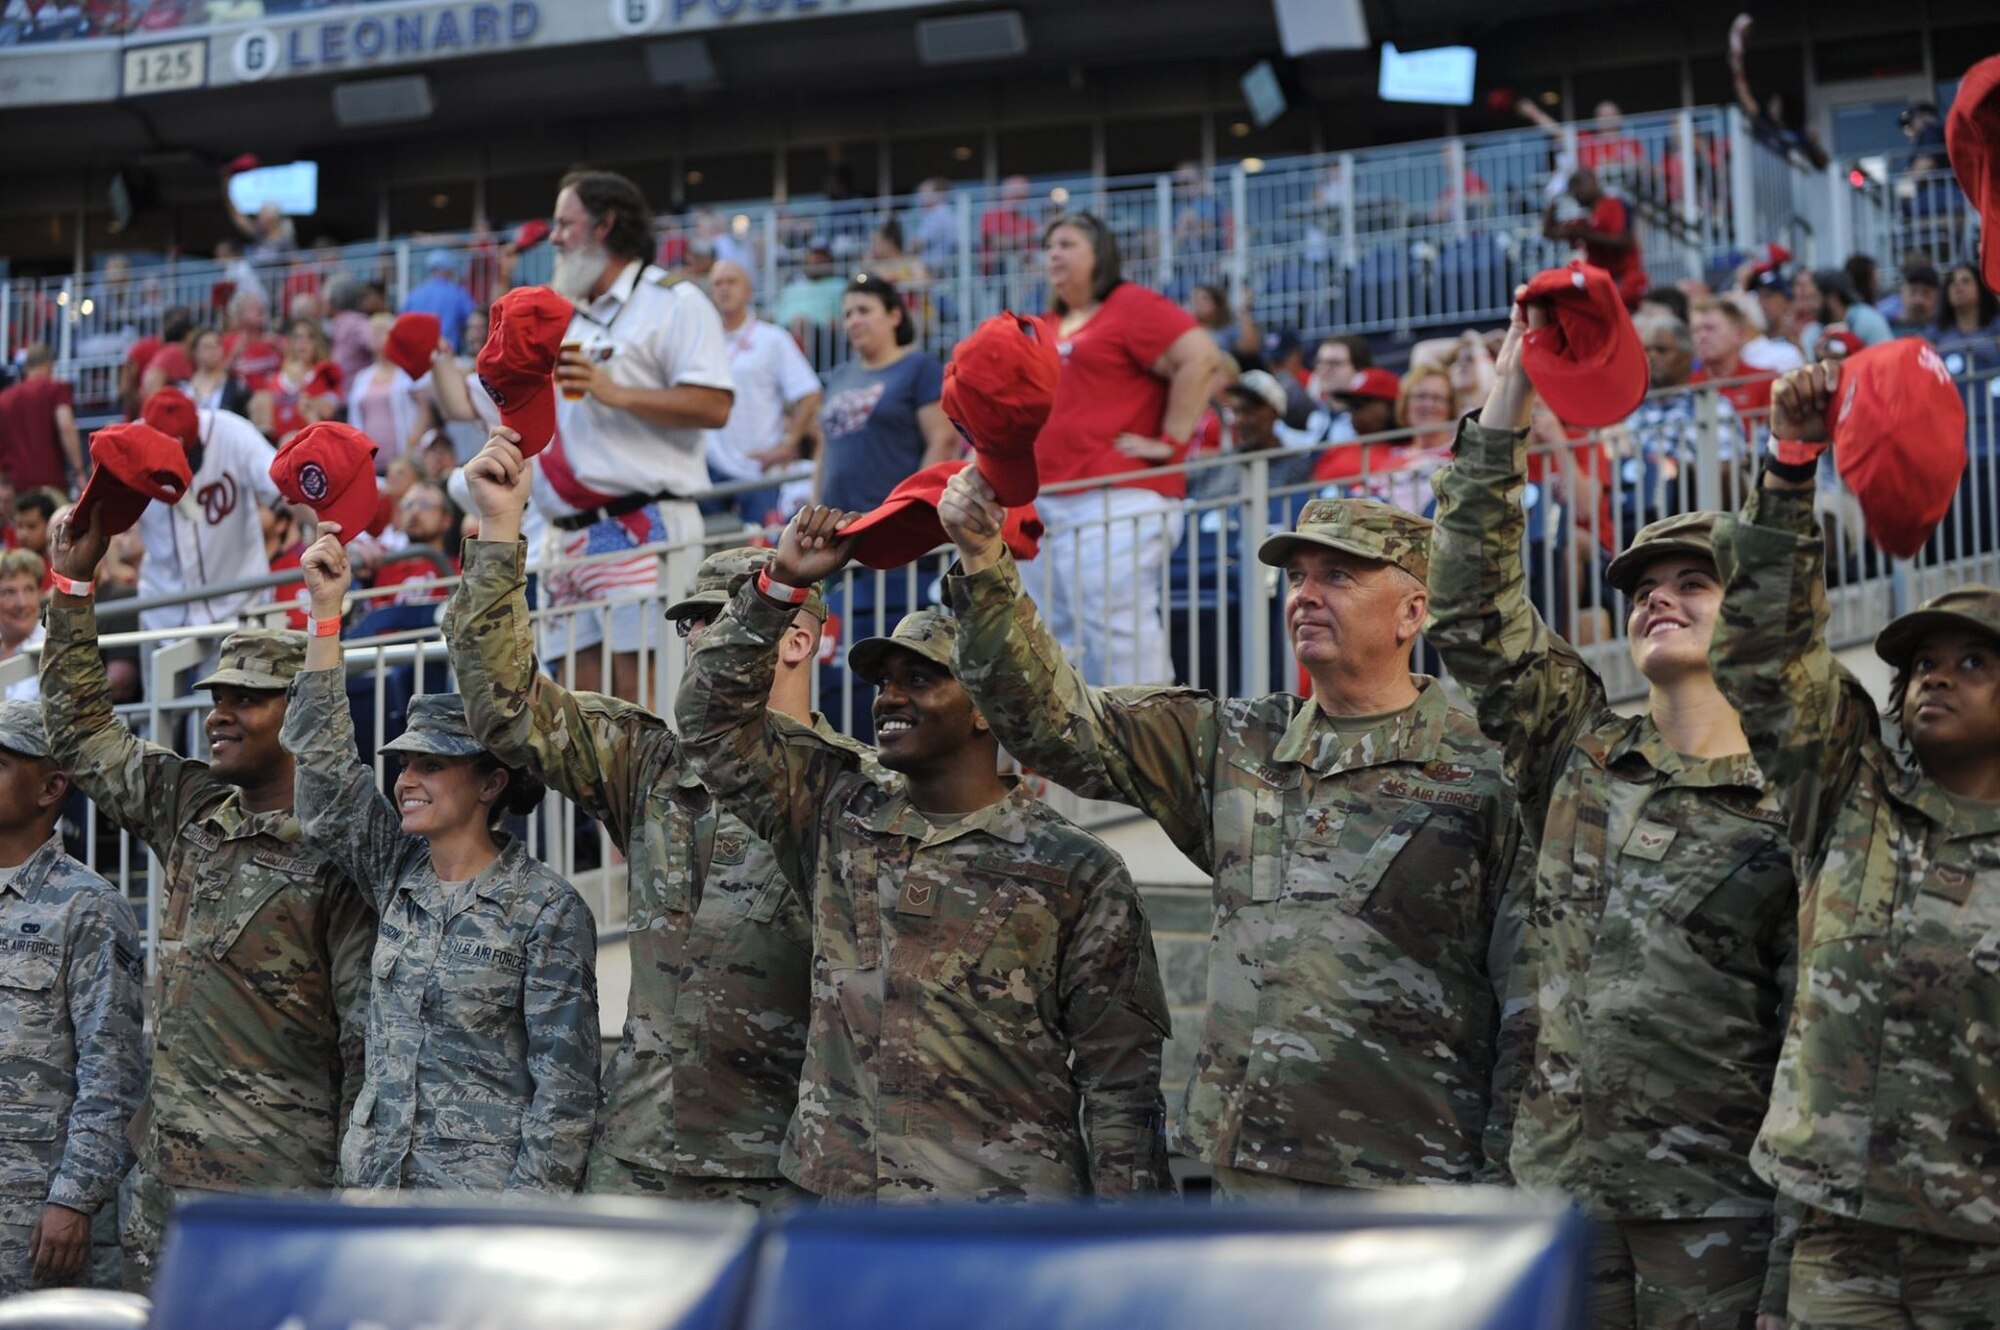 Air Force District of Washington Commander Maj. Gen. Ricky N. Rupp joined his Airmen for the Salute to Service event at Nationals Park Aug. 13. The Airmen enjoyed club house hospitality, premium home plate seating, and a third inning shout out on the NatsHD Scoreboard as they waved their caps in support of the Washington Nationals, who face off against the Cincinnati Reds. Tonight’s theme? Grateful Dead!

The Nationals offer premium seating in the Washington Nationals Stadium - Delta Sky 360club for select military groups and their families during every home game and attendees receive a standing ovation from fans. (U.S. Air Force photos/Lt. Col. John Ross and Master Sgt. Amaani Lyle)